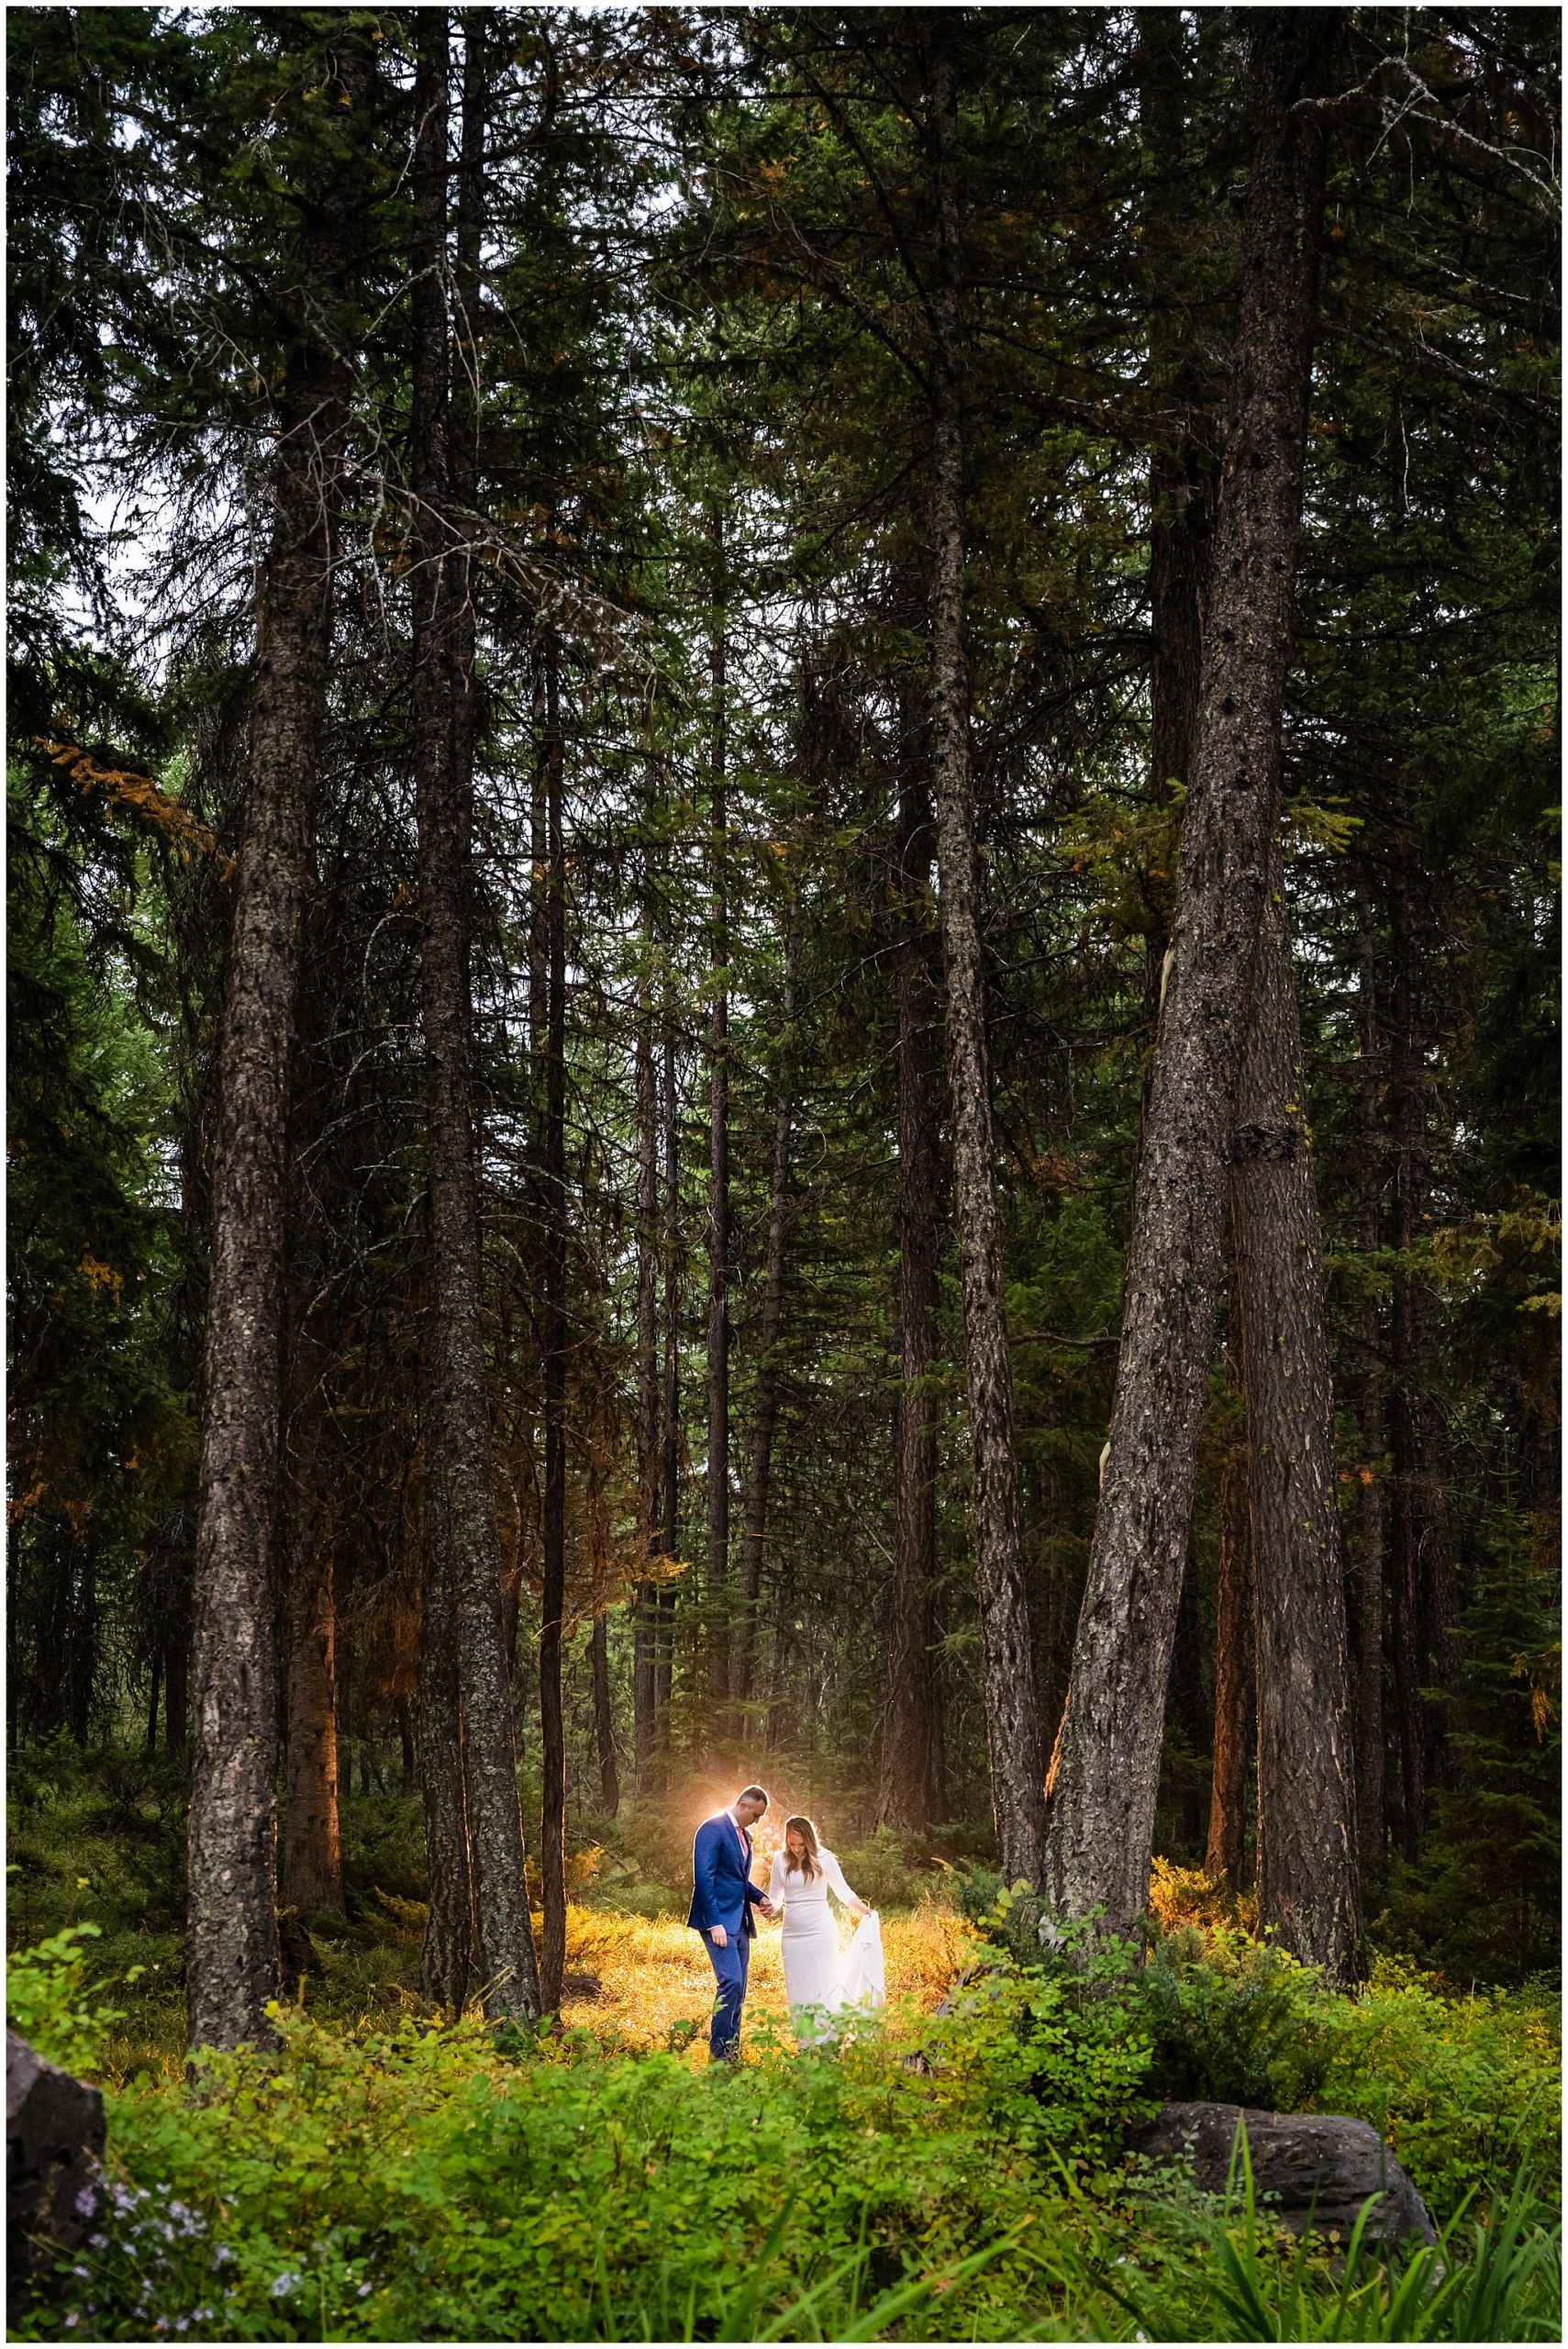 Bride and groom portraits with an elegant fitted dress and blue suit with coral tie in the Montana forest and near a pond | Mountainside Weddings Kalispell Montana Destination Wedding | Jessie and Dallin Photography